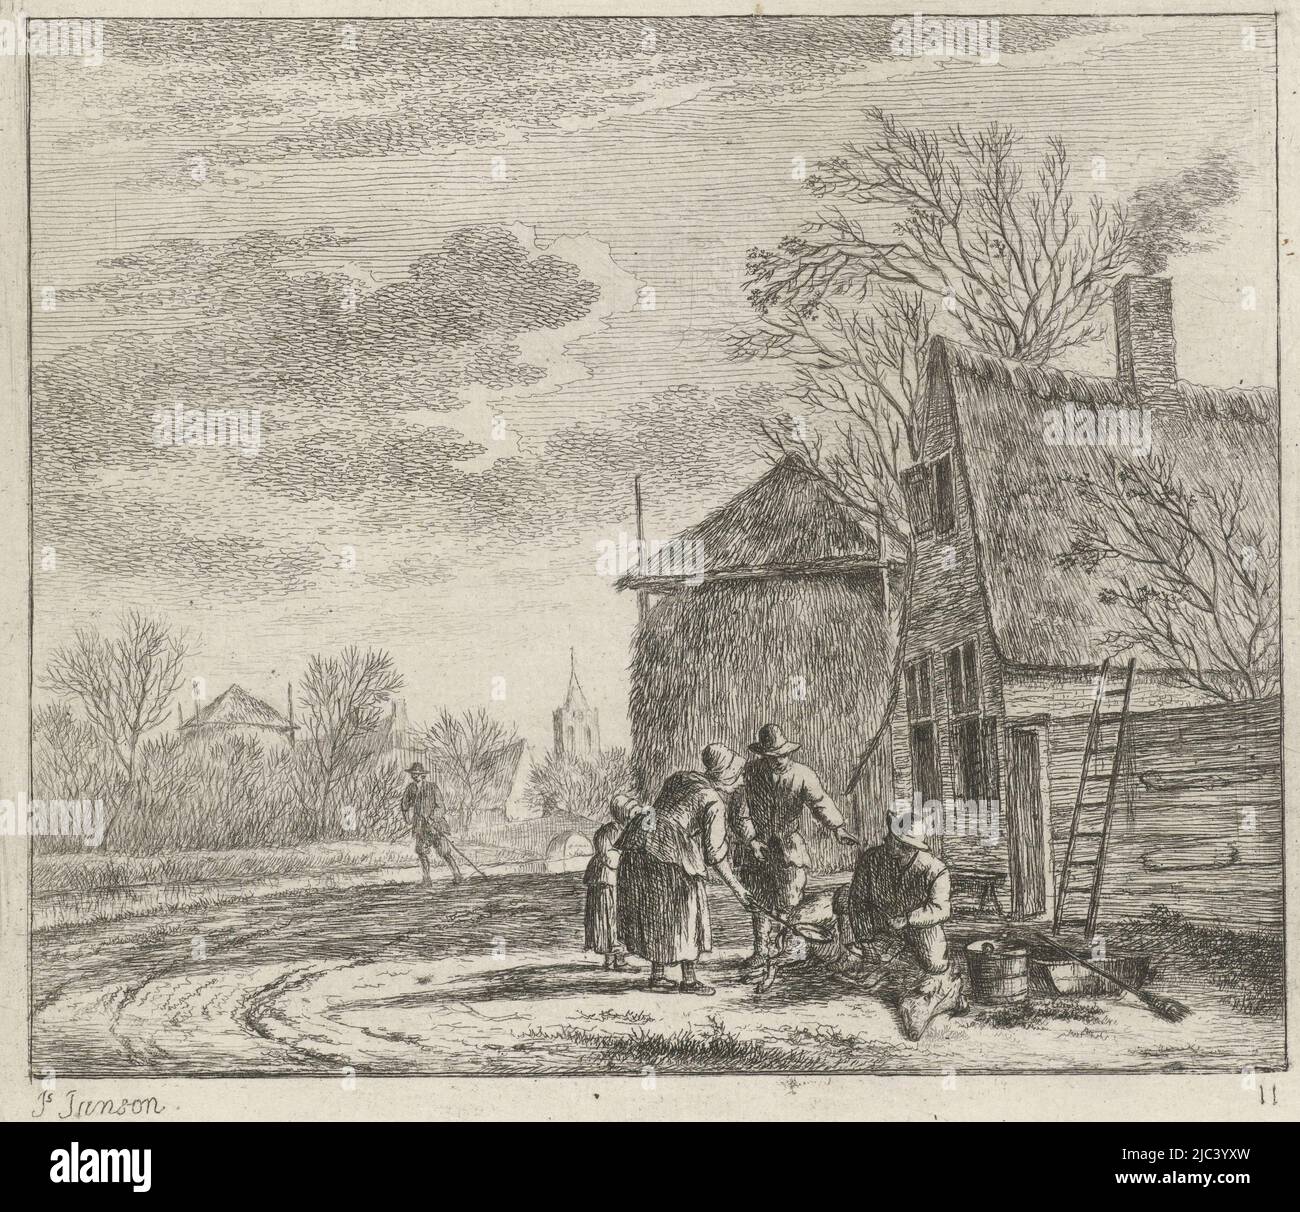 Landscape with a farmhouse to the right, with smoke coming out of the chimney, and a hay barn. In front of the farm a group of two women and two men, one of whom is cutting up a pig. On the left on a path a man walking. In the background a hay barn and church tower. Bottom right: 11. Twelfth print from a series of thirteen with months, Landscape with farmhouse and hay barn November The twelve months (series title) The coloured Drawings of the 12 Months (...) (series title), print maker: Johannes Janson, (mentioned on object), Johannes Janson, Leiden, 1783, paper, etching, h 146 mm × w 170 mm Stock Photo